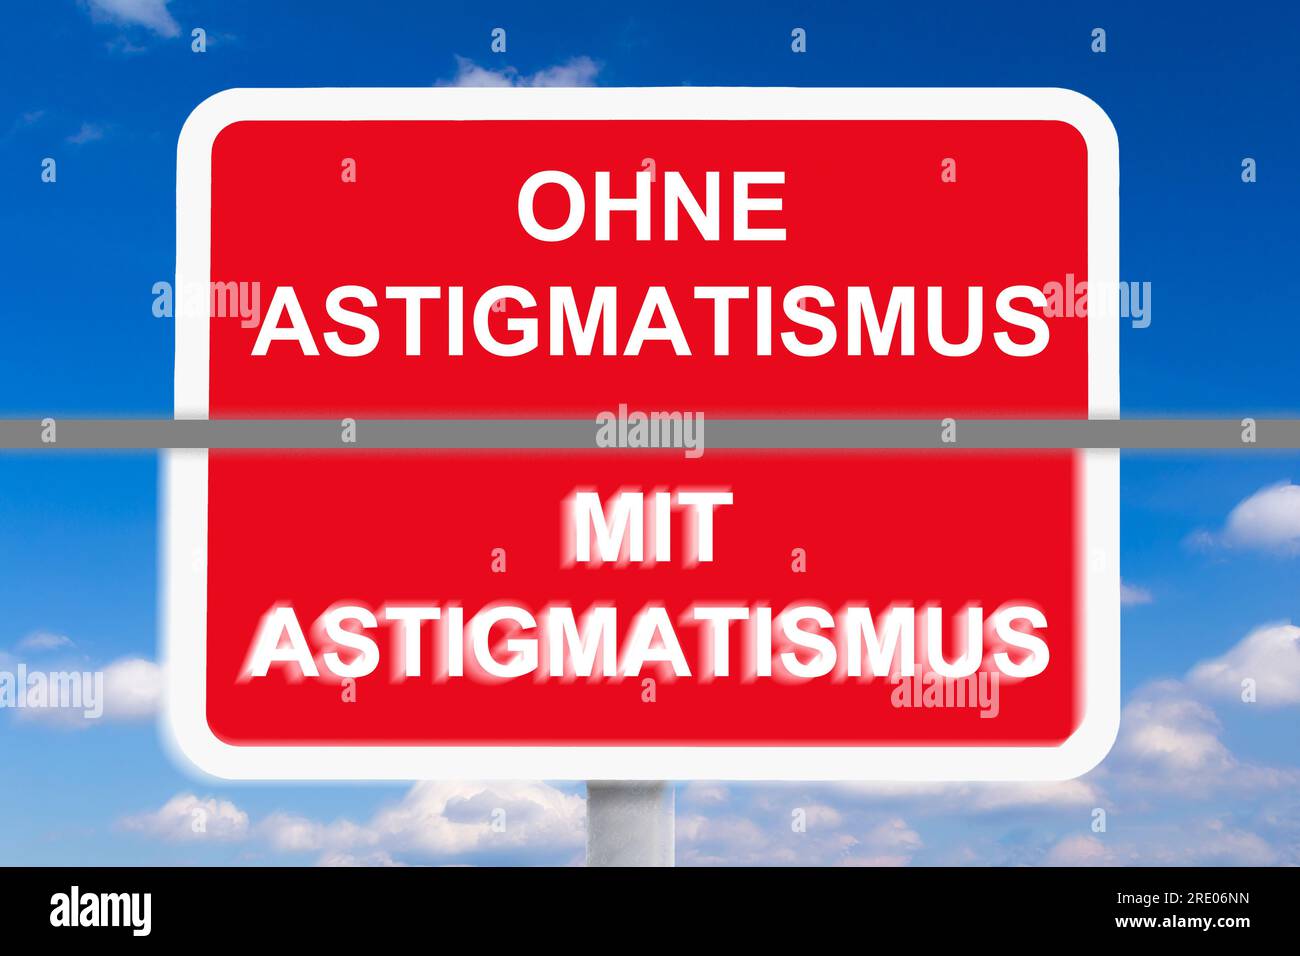 German text meaning: without and with astigmatism. Example of blurred or distorted eyesight or vision caused by astigmatism in the eye. Stock Photo